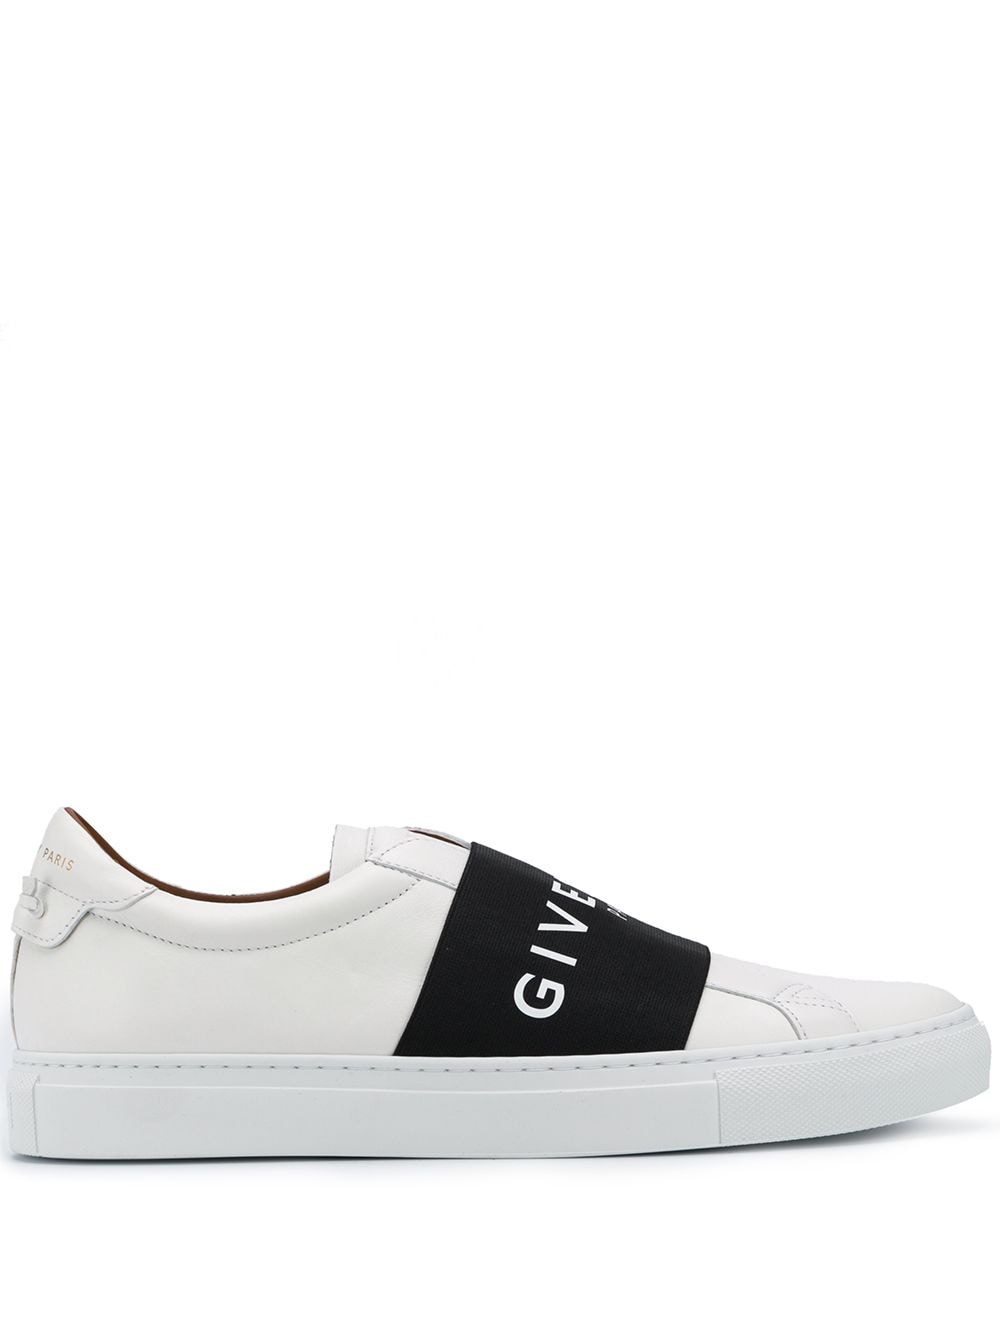 Urban Street Leather Sneakers мъжки обувки Givenchy 841318634_40